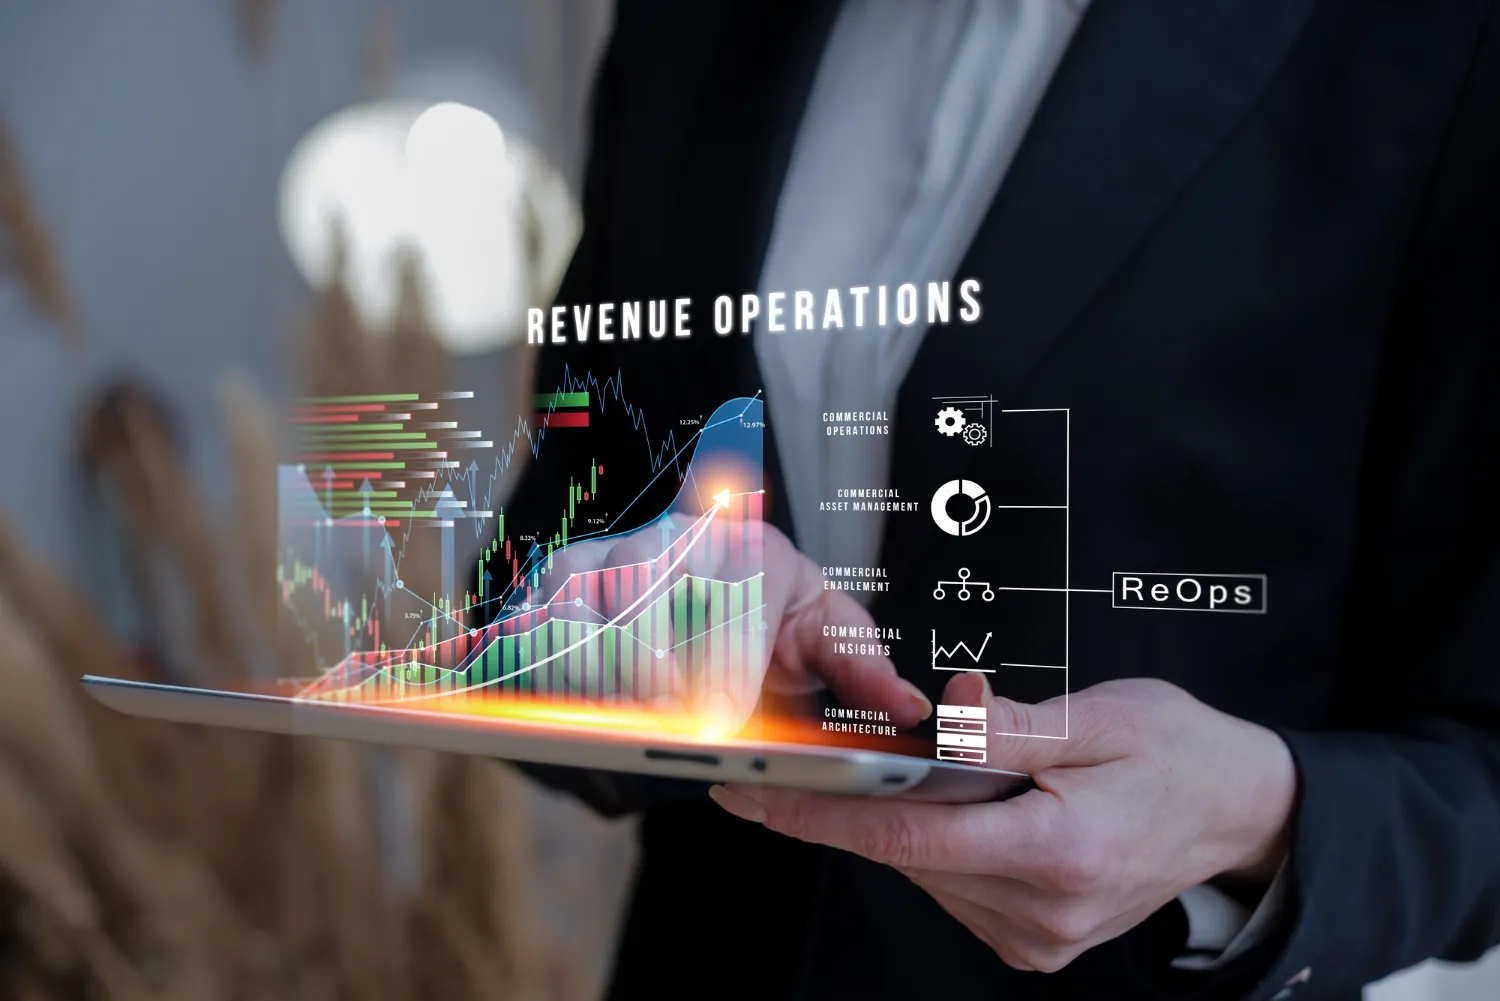 A person holding a tablet displaying futuristic revenue operation analytics, illustrating the theme of financial regulatory evolution and technological innovation, as explored by JOH Partners.